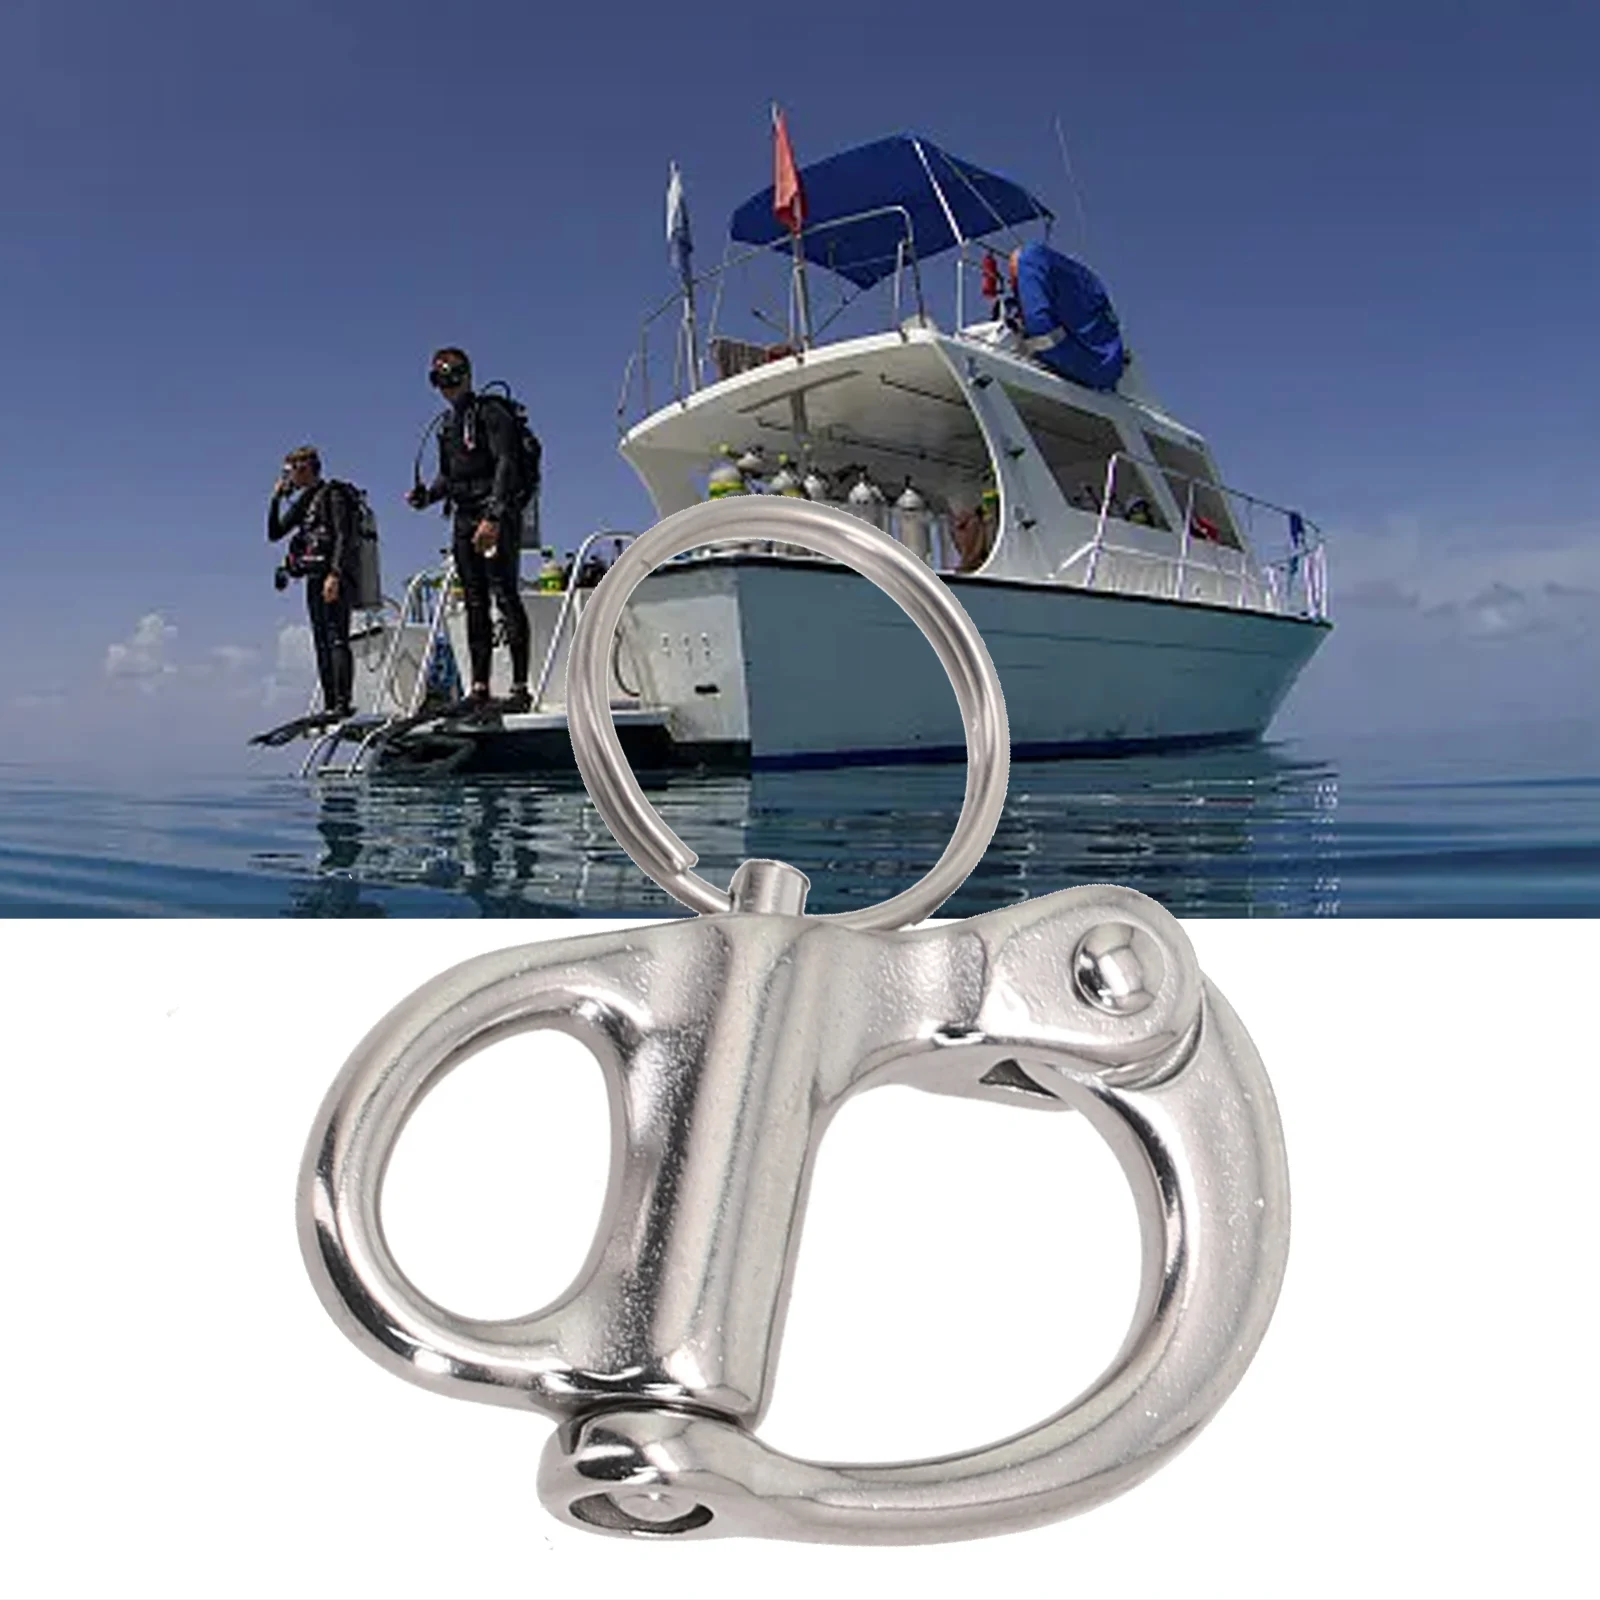 1PCS 35/52/69/96MM Quick Release Boat Anchor Chain Eye Shackle Swivel Hook Snap Marine Tools 316/304 Stainless Steel Accessory high voltage capacitor discharger 9 630vac12 900vdc air conditioner discharging protections repairing tools accessory quick discharge silicone pen